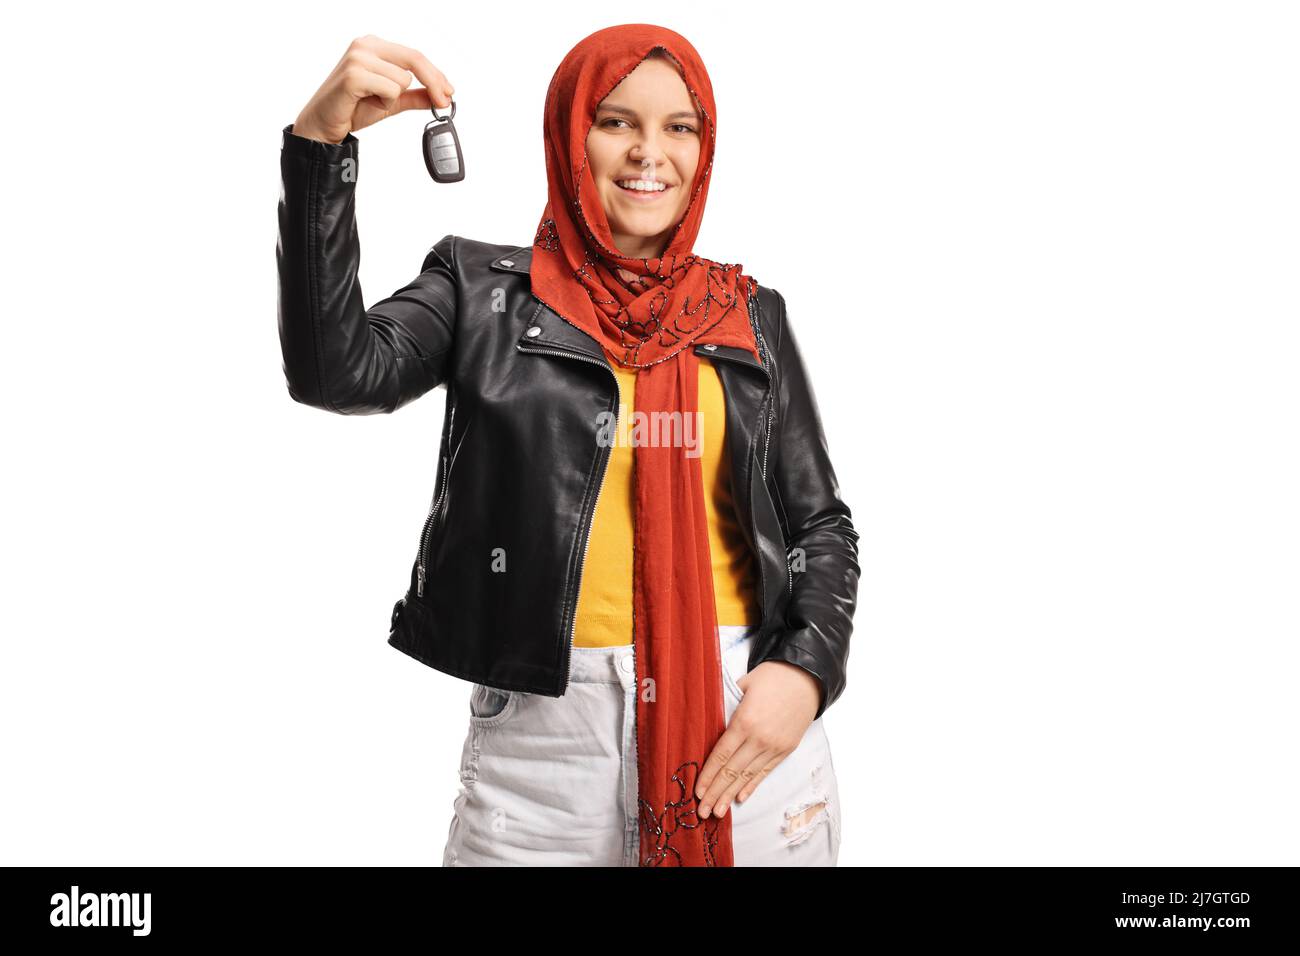 Young woman with a hijab holding car keys and smiling isolated on white background Stock Photo